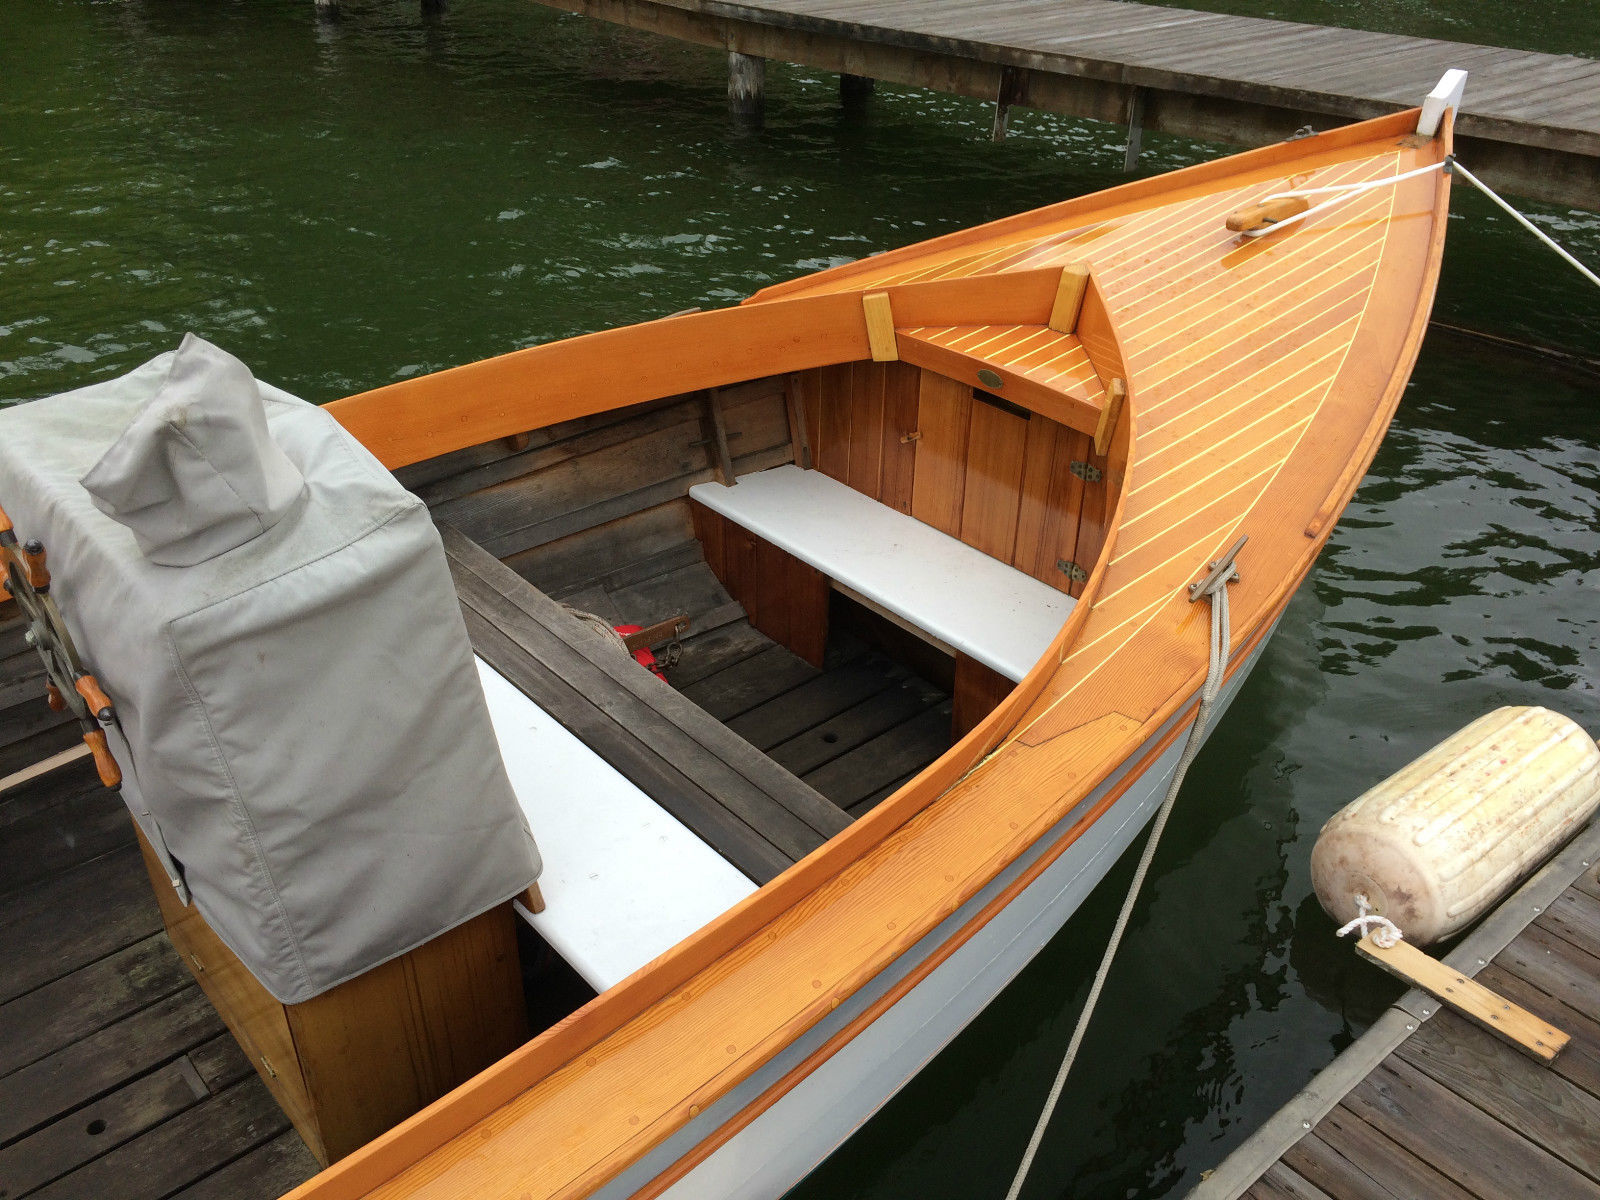 nw school of wooden boats handy billy 1999 for sale for